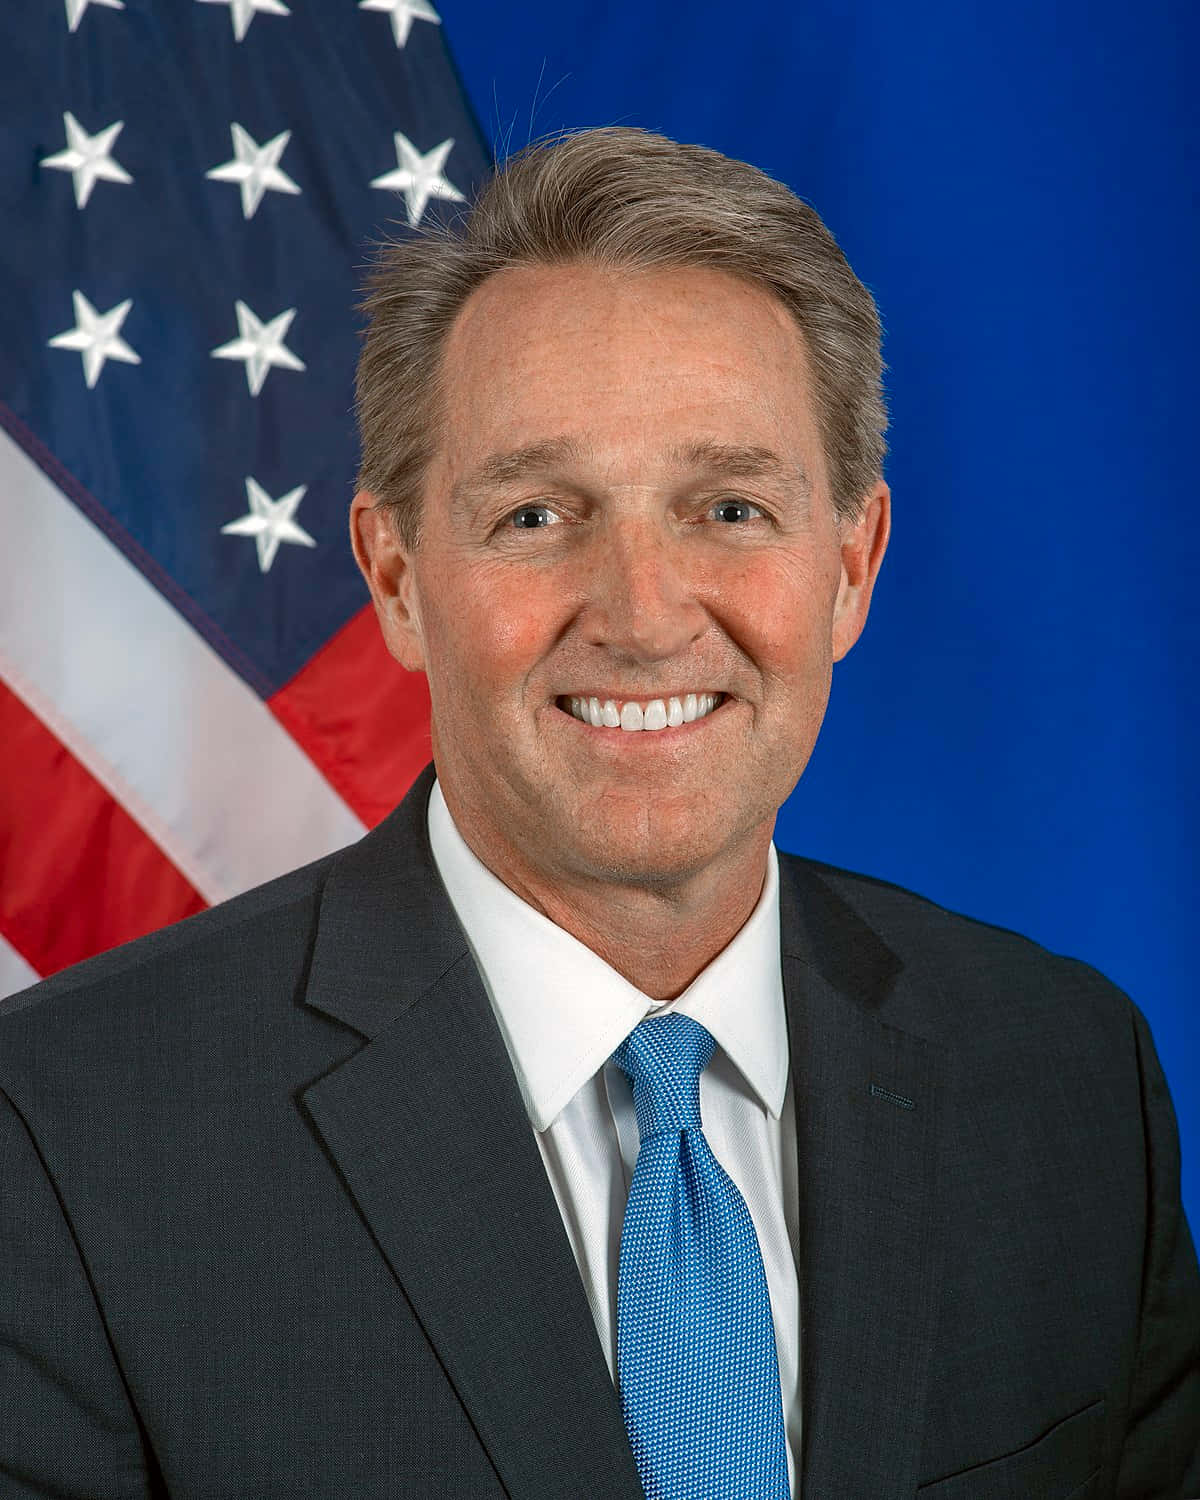 Jeff Flake - Prominent U.S. Politician and Diplomat Wallpaper